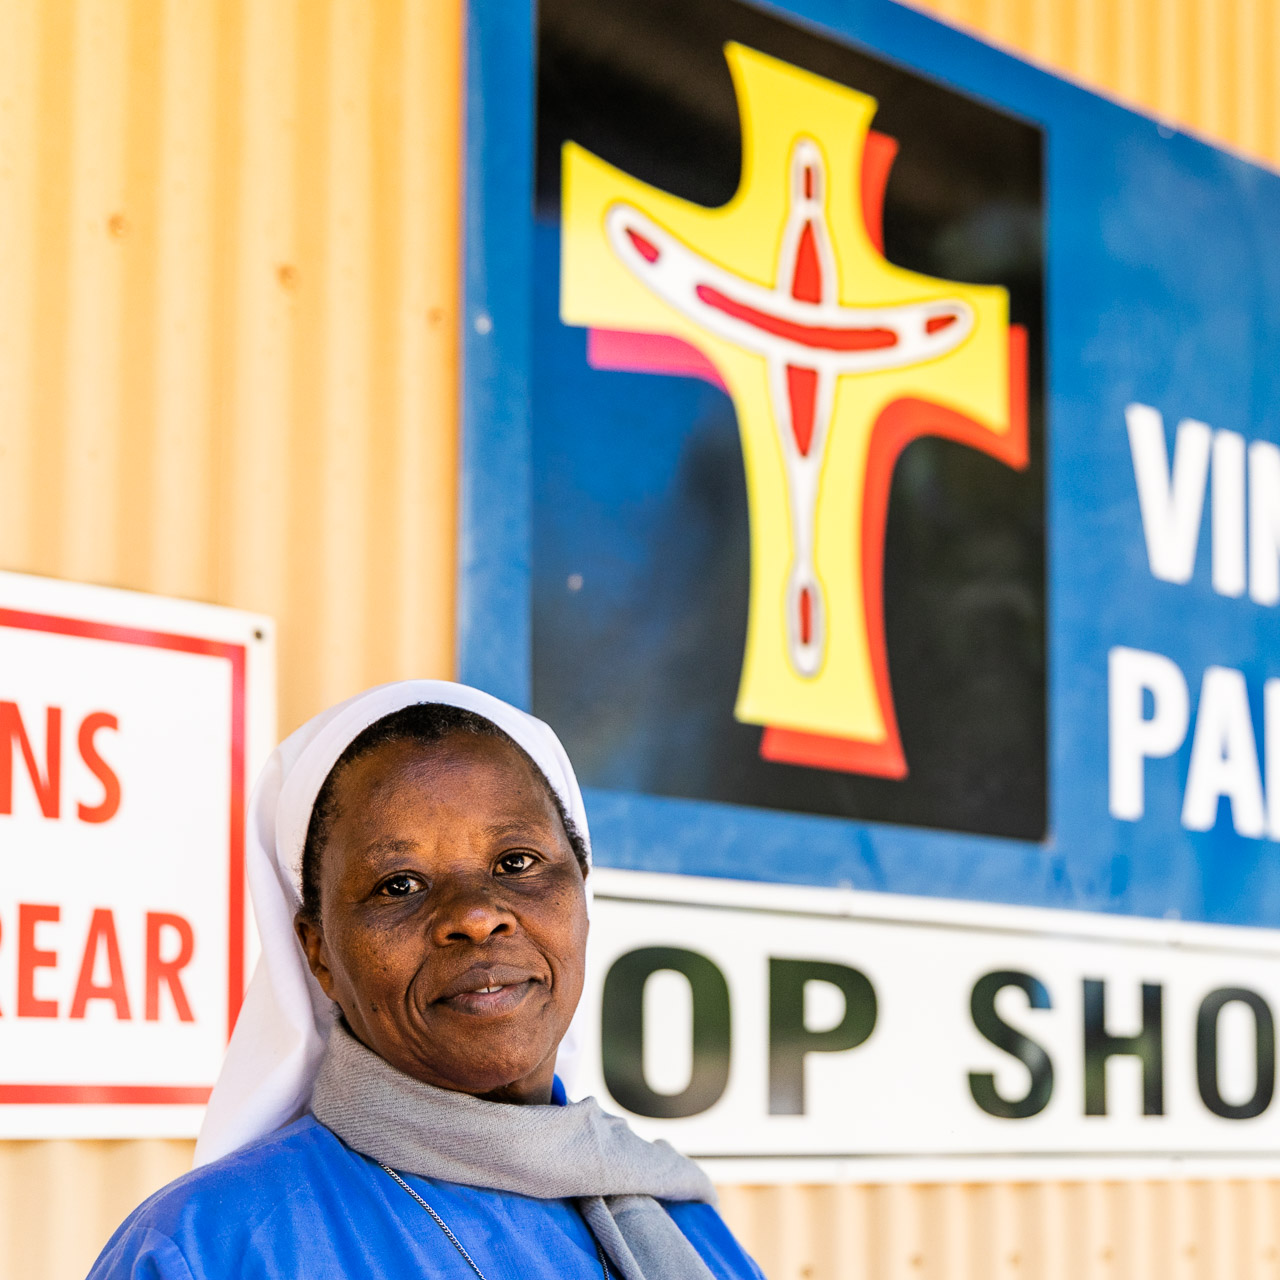 Sister Mary is in Broome from Kenya for four years, working at the St Vinnies Op Shop